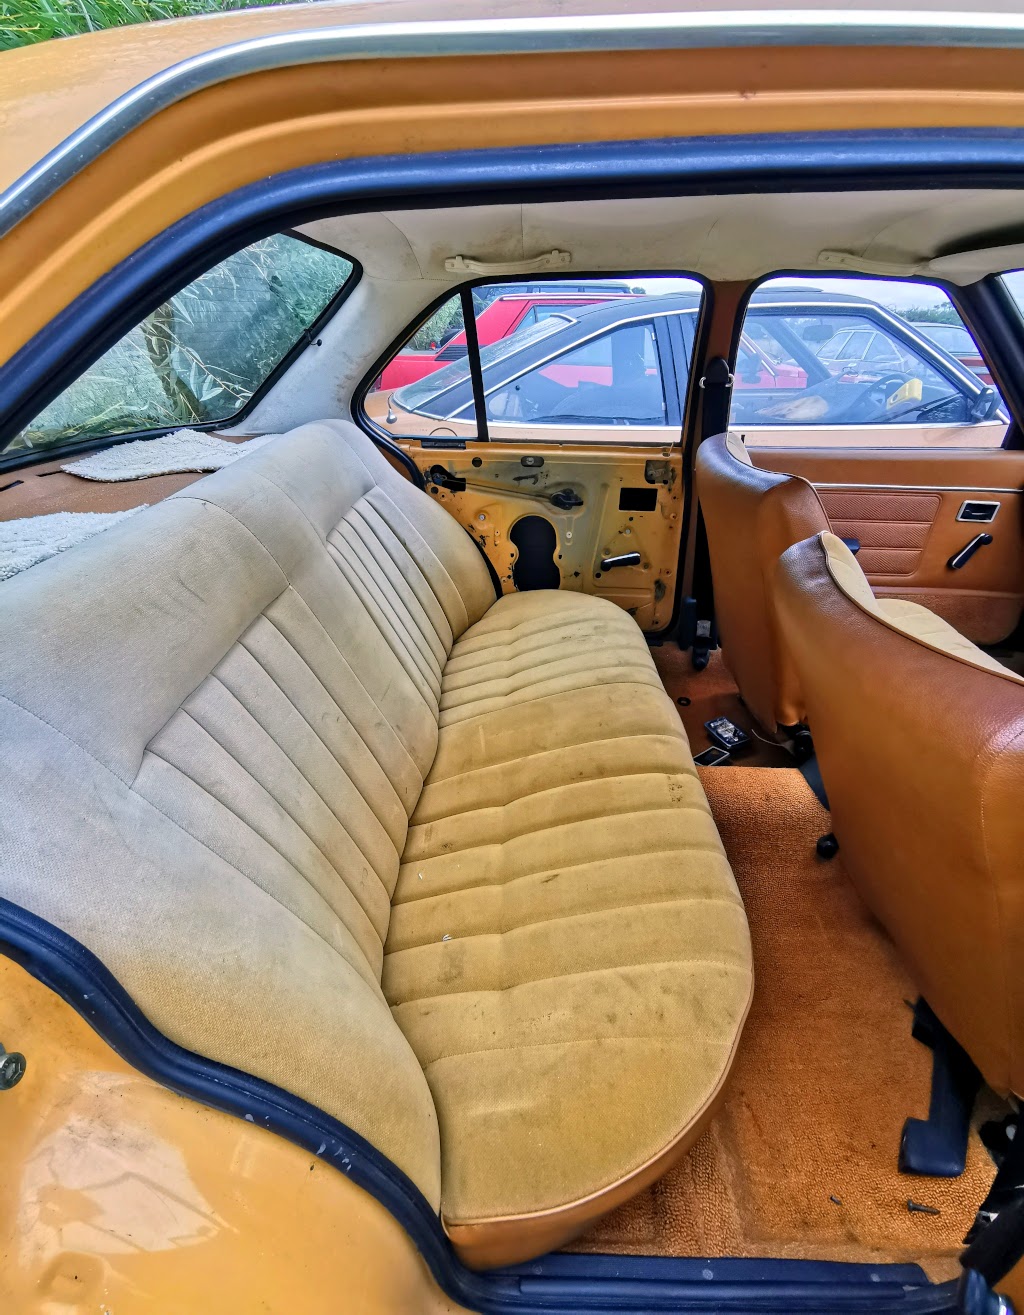 Interior view from the rear right